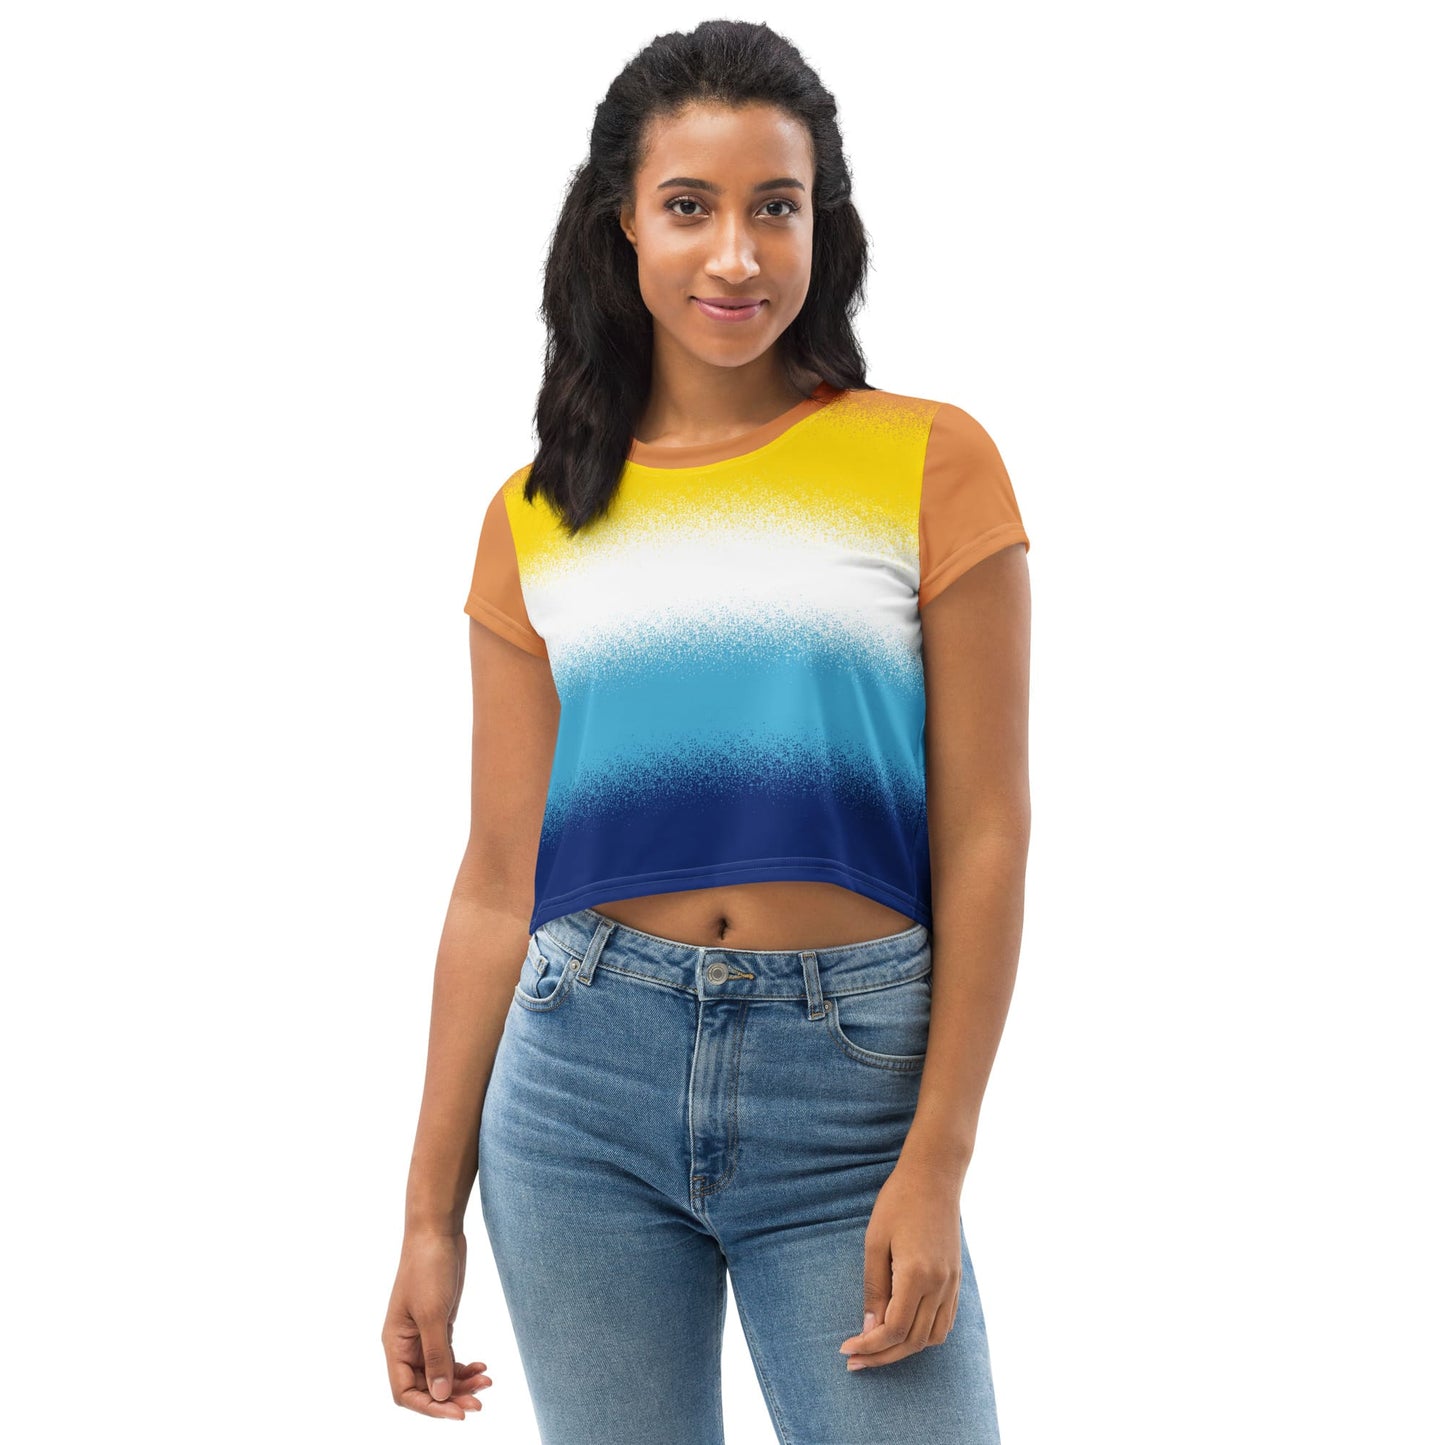 aroace crop top, aro ace pride cropped shirt with wings on back, front